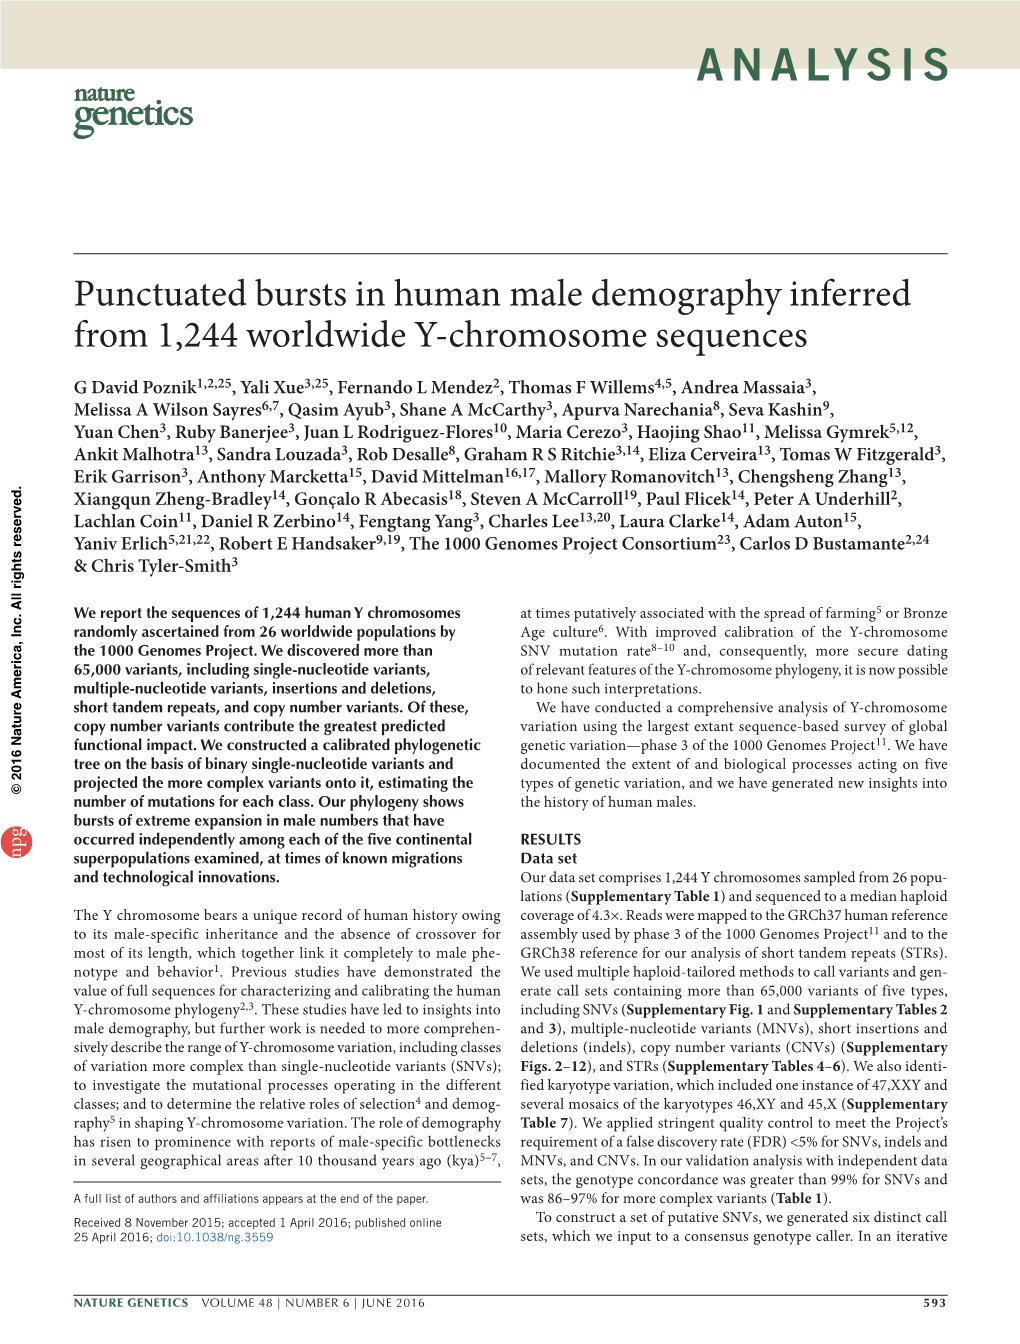 Punctuated Bursts in Human Male Demography Inferred from 1,244 Worldwide Y-Chromosome Sequences